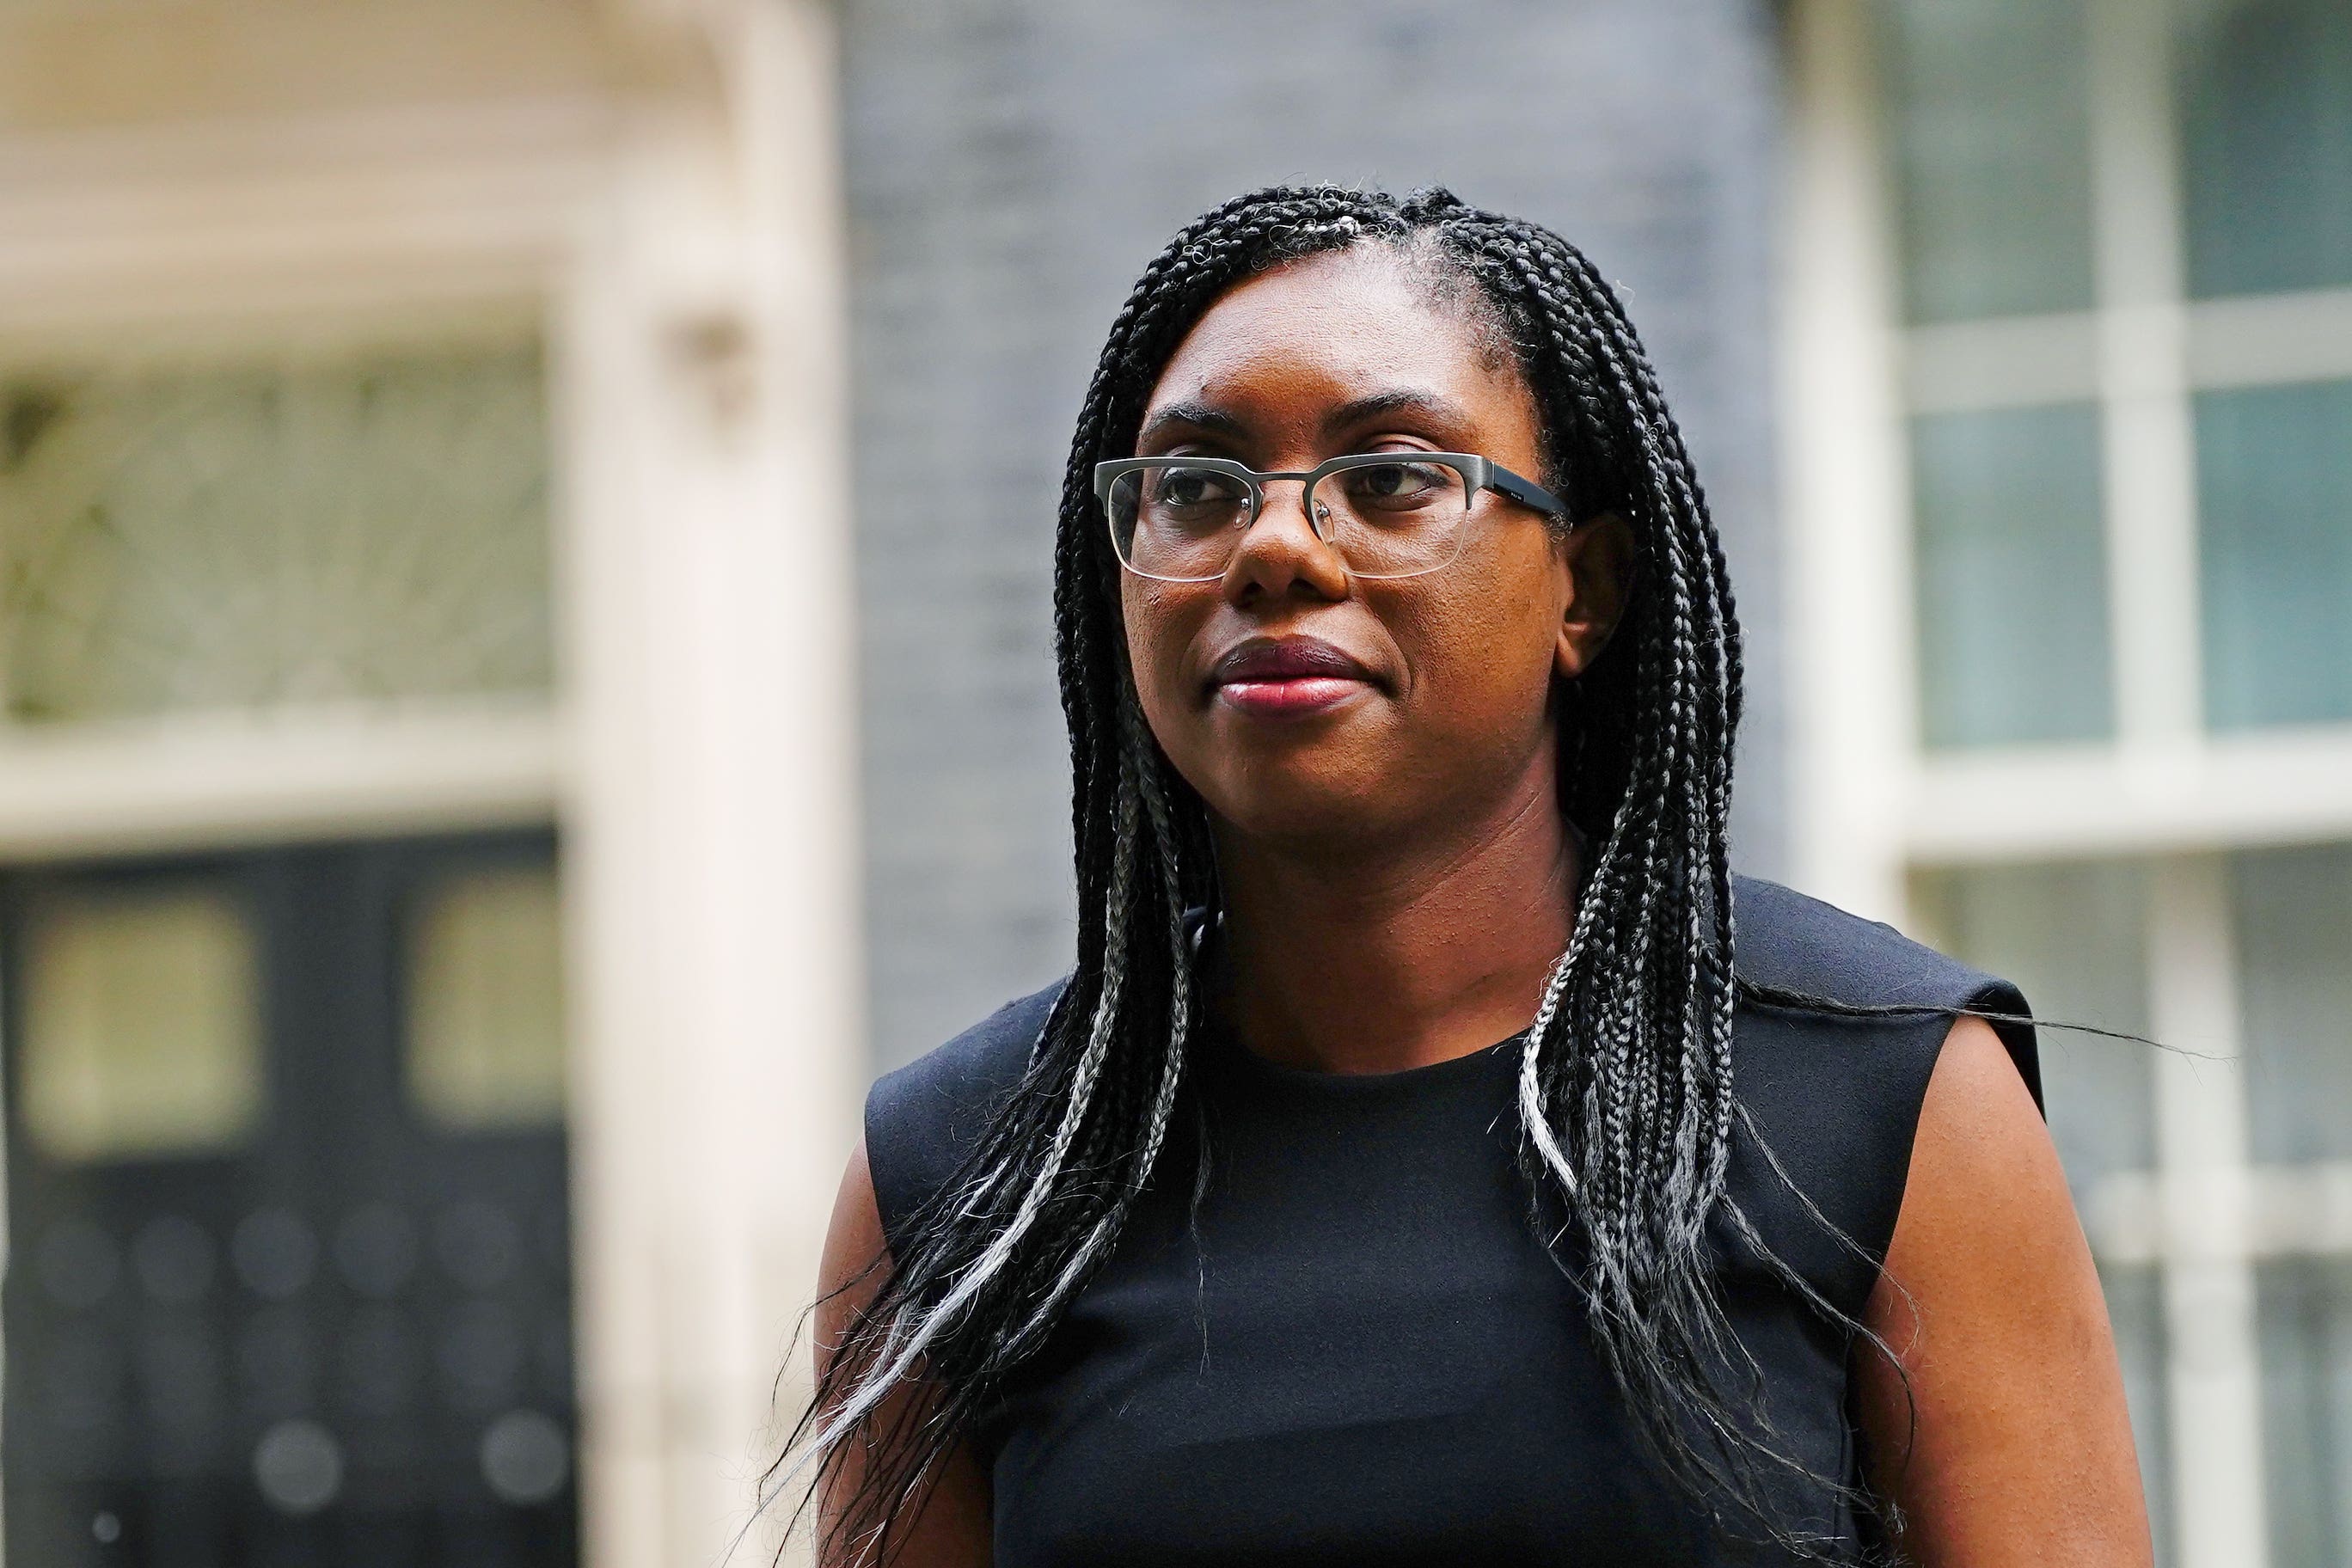 Kemi Badenoch admits concerned investors have asked about HS2’s future